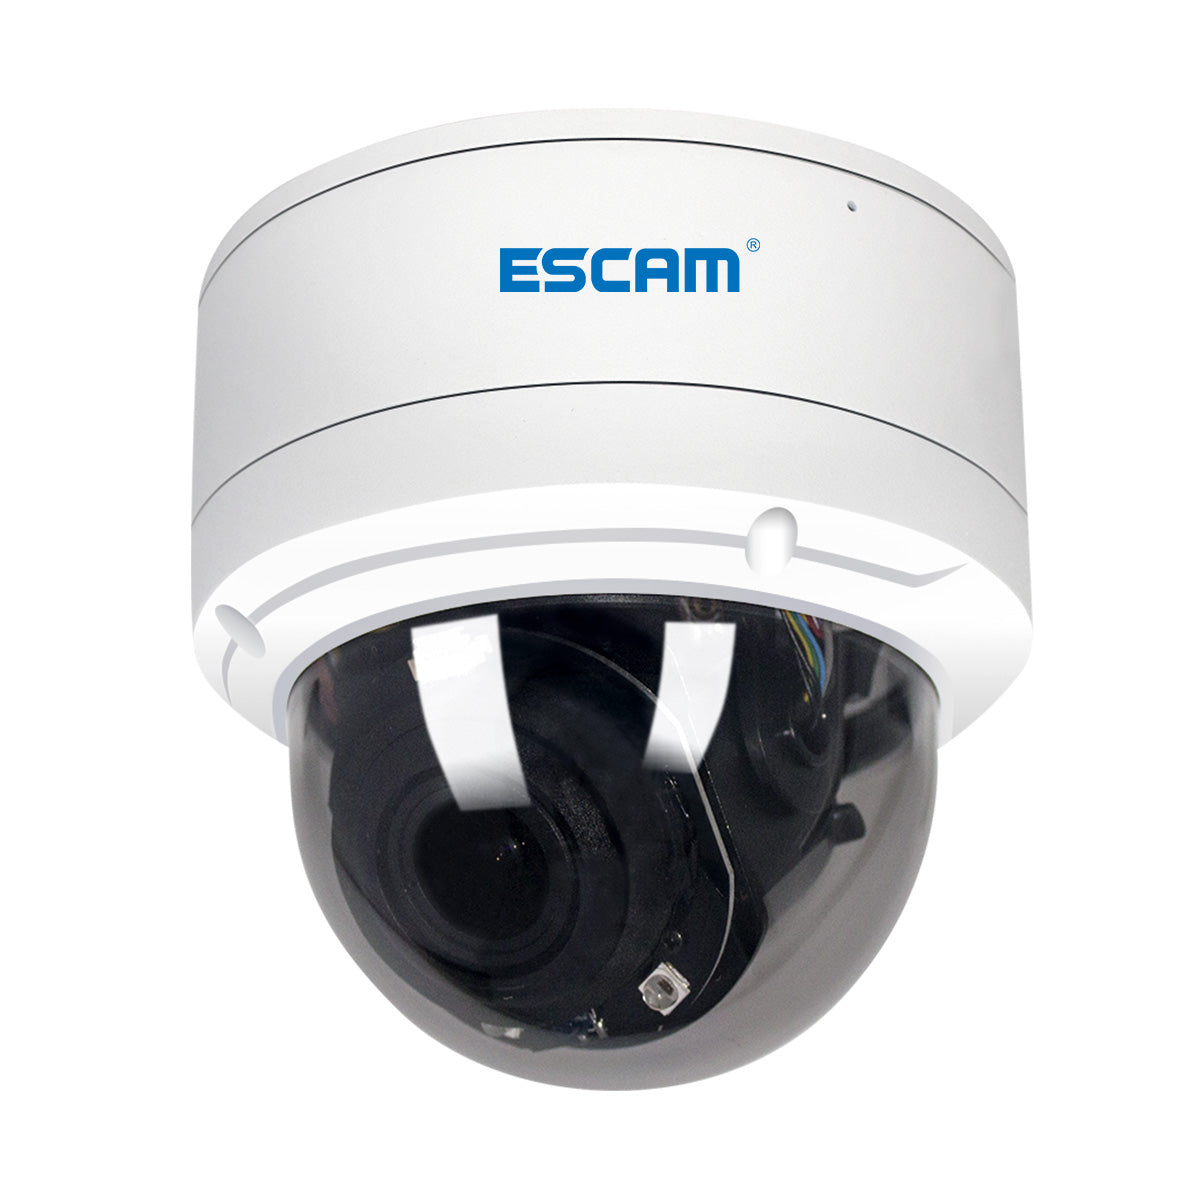 ESCAM PVR002 2MP 1080P PTZ 4X Zoom 2.8-12mm Lens Waterproof POE Dome IP H.265 Camera Support ONVIF IR distance 15m Private Cloud Protocol